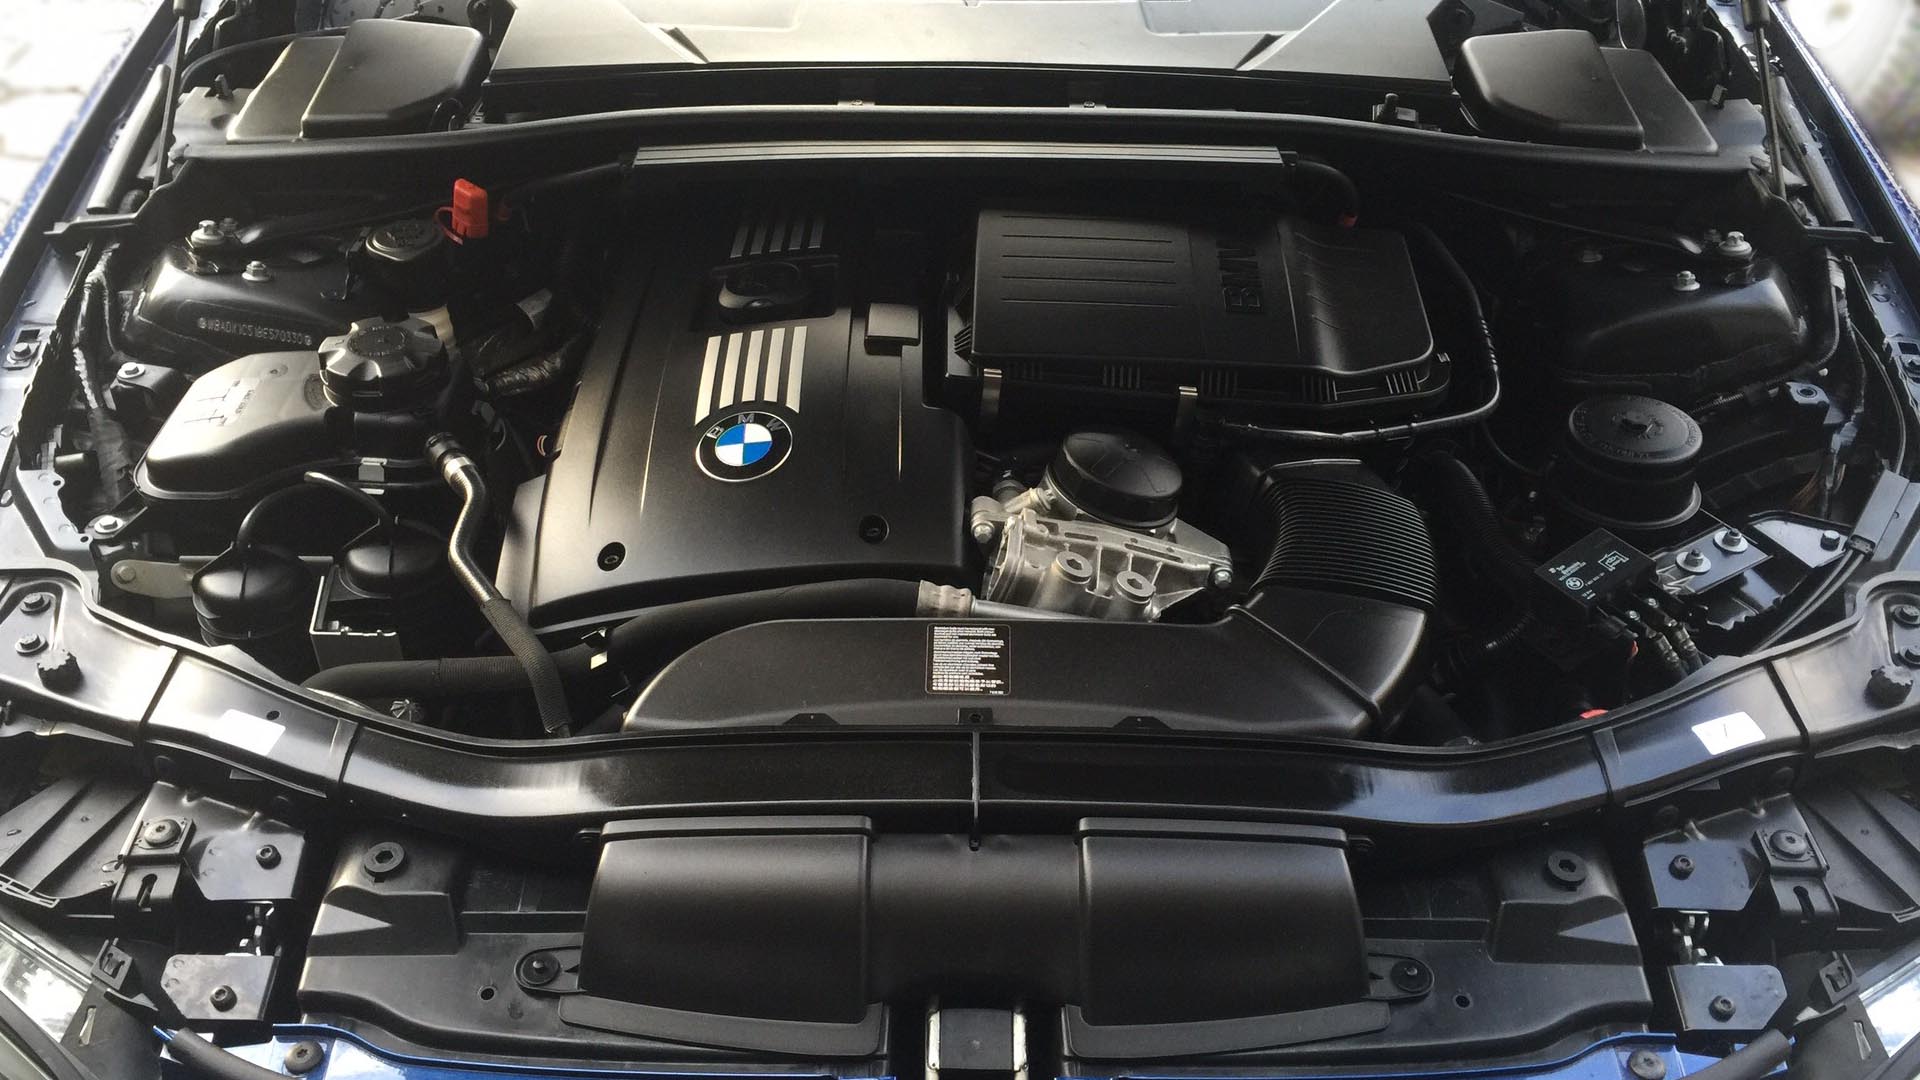 The Definitive Guide To The BMW N54 Engine - Common Faults, Failures, & Repairs